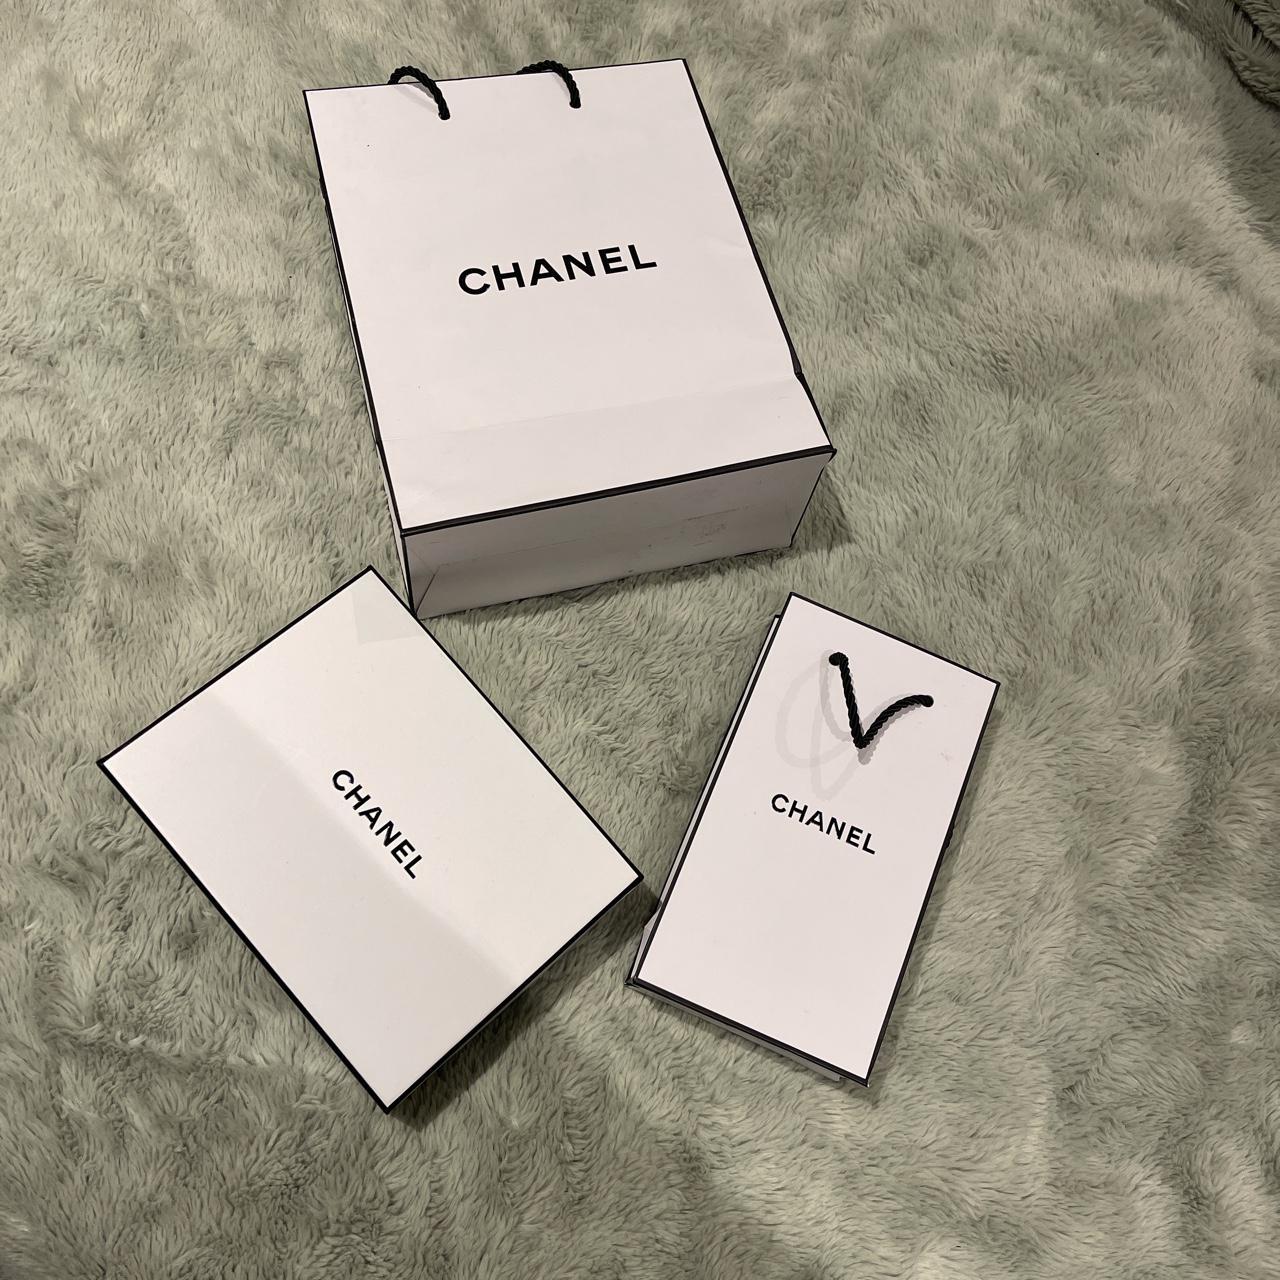 Chanel gift box and bags - Depop